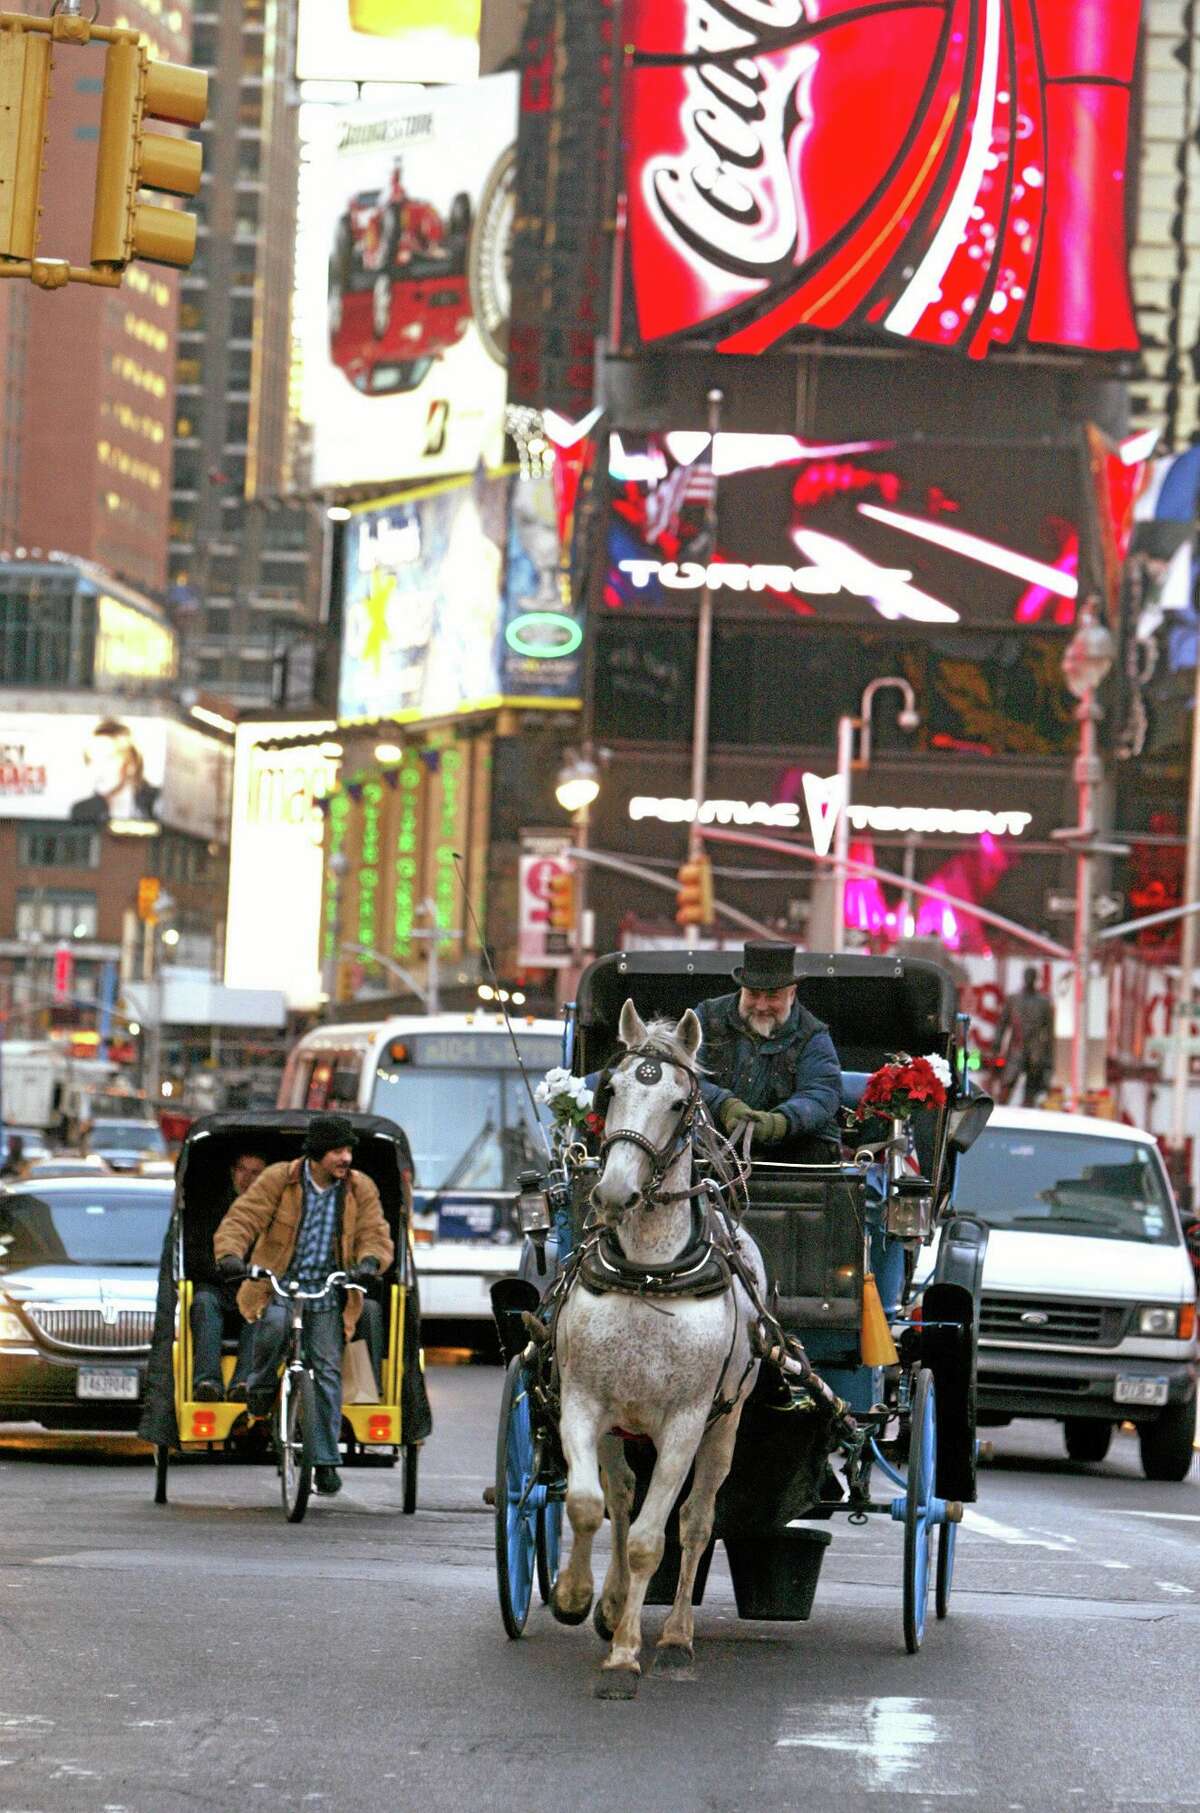 FILE- In this March 1, 2006, file photo, a pedicab driver, left, and a horse-drawn carriage make their way down Broadway in New York's Times Square. New York City Mayor Bill de Blasio seeks to shut down the cityís horse-drawn-carriage industry, believing that it was less than humane to put horses on busy New York City streets. Carriage-horse drivers counter that their industry provides homes for surplus horses from farms and the racing industry that would otherwise be shipped off to slaughterhouses. (AP Photo/Mary Altaffer, File)